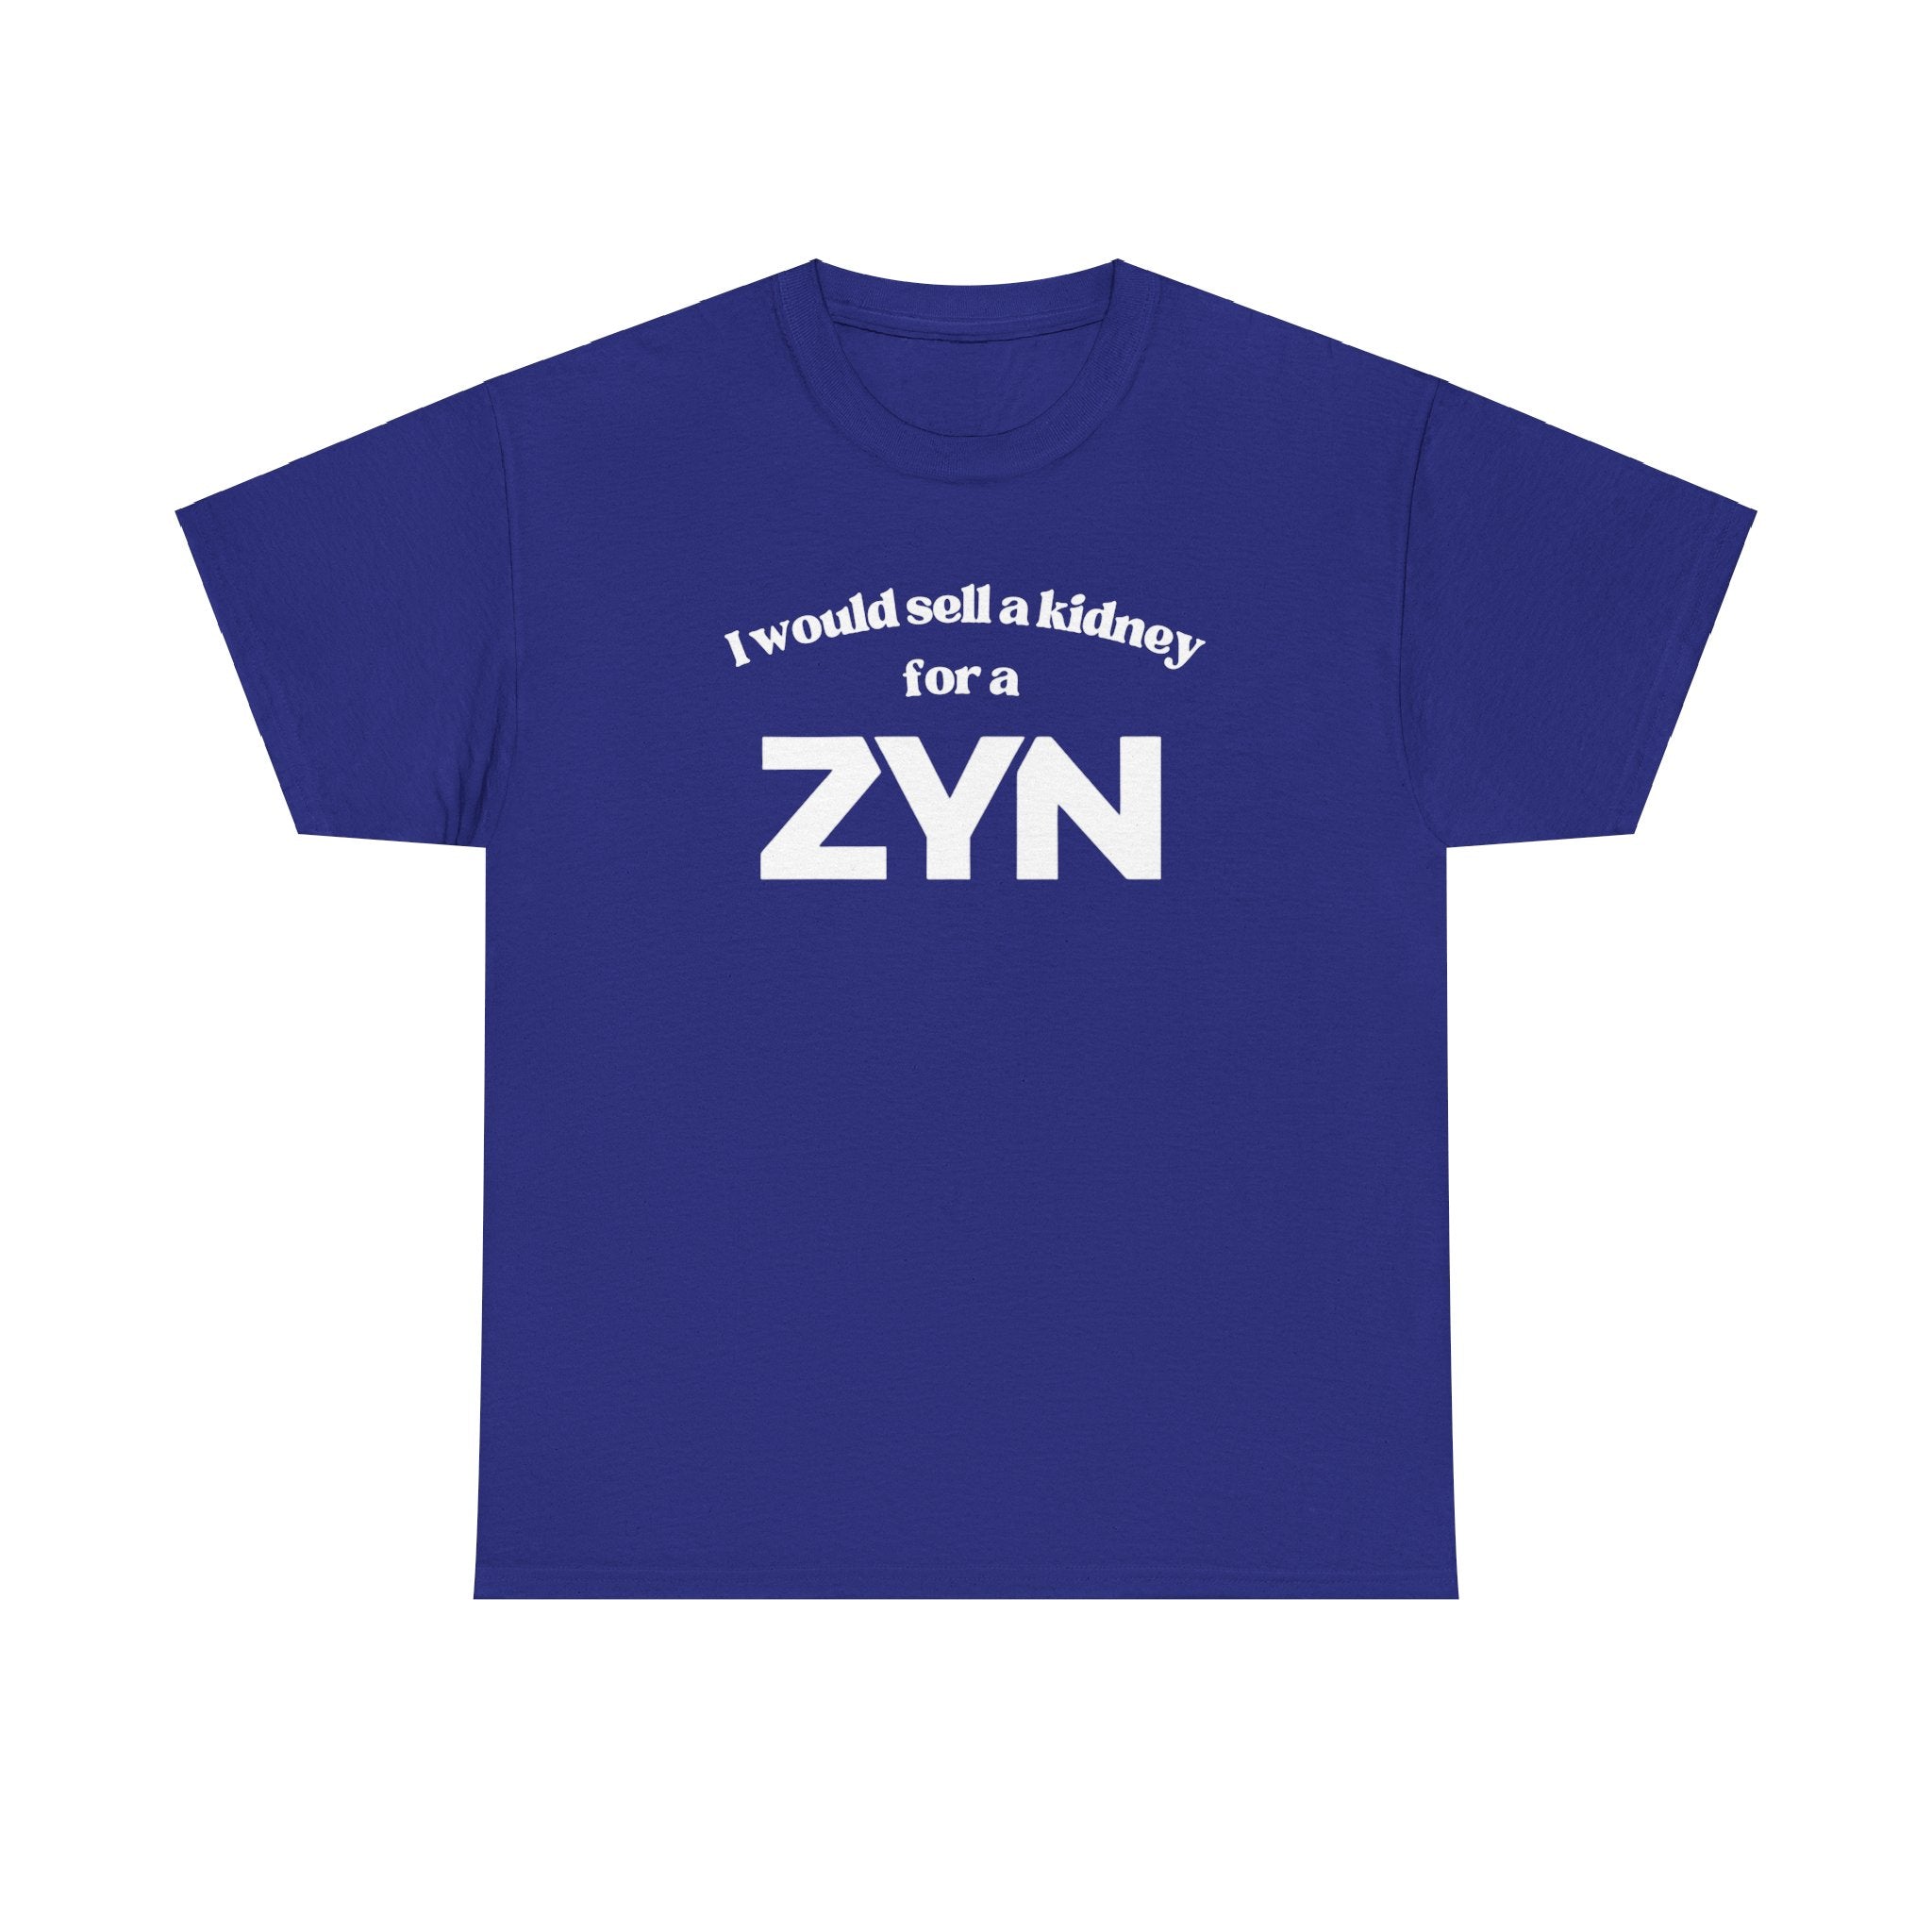 I Would Sell a Kidney for a Zyn